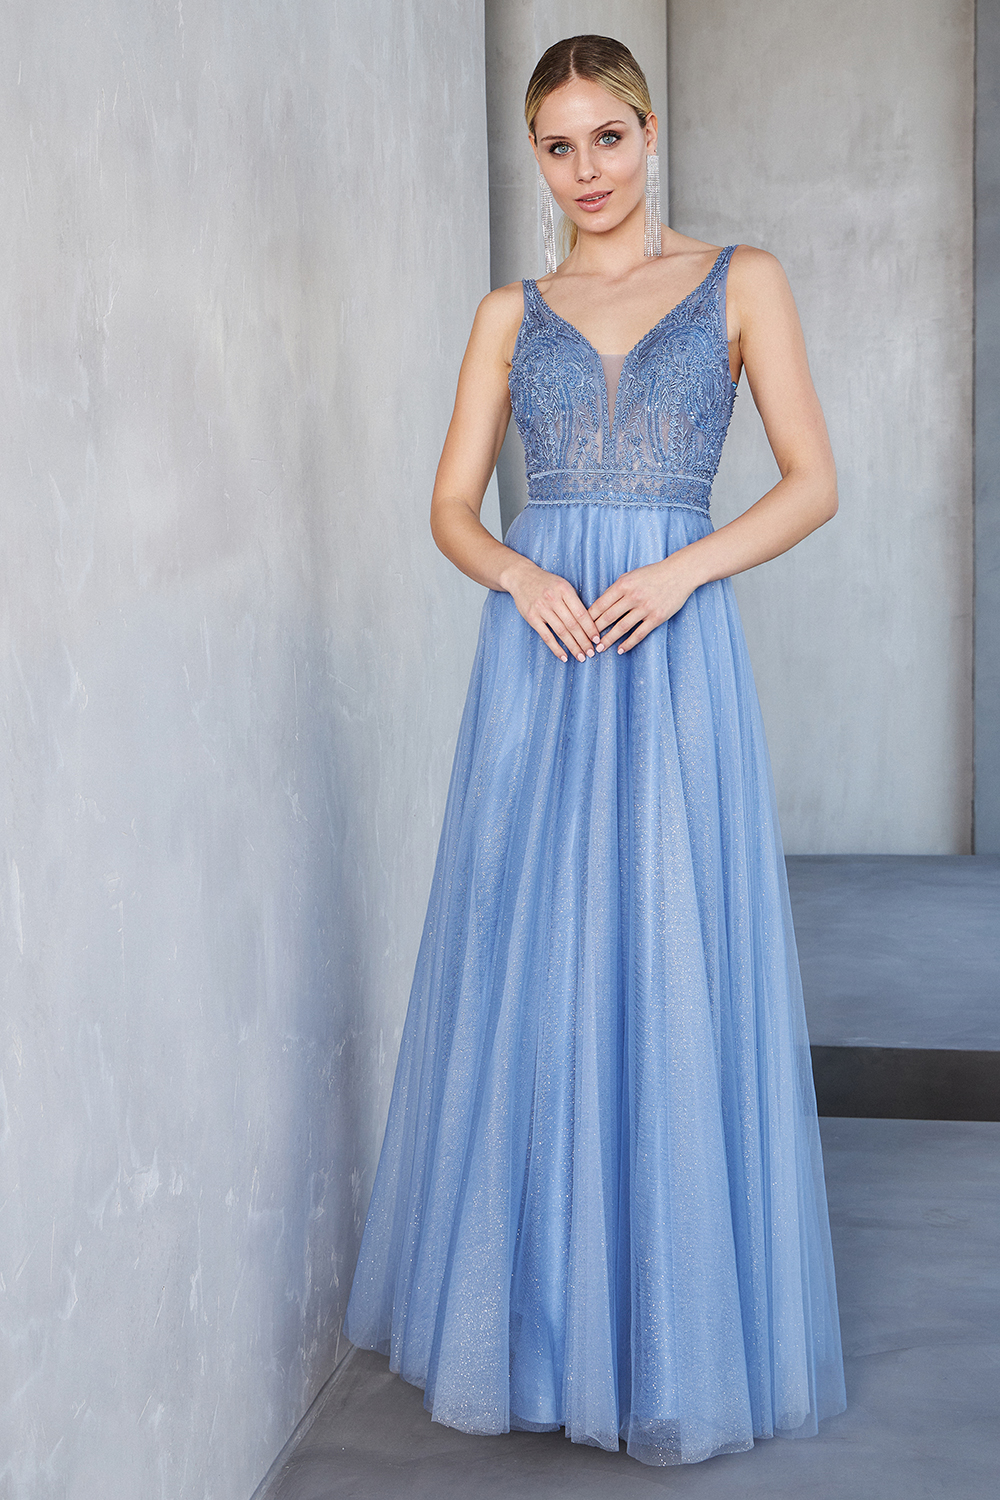 Вечерние платья / Long evening dress with shining tulle fabric and fully beaded top